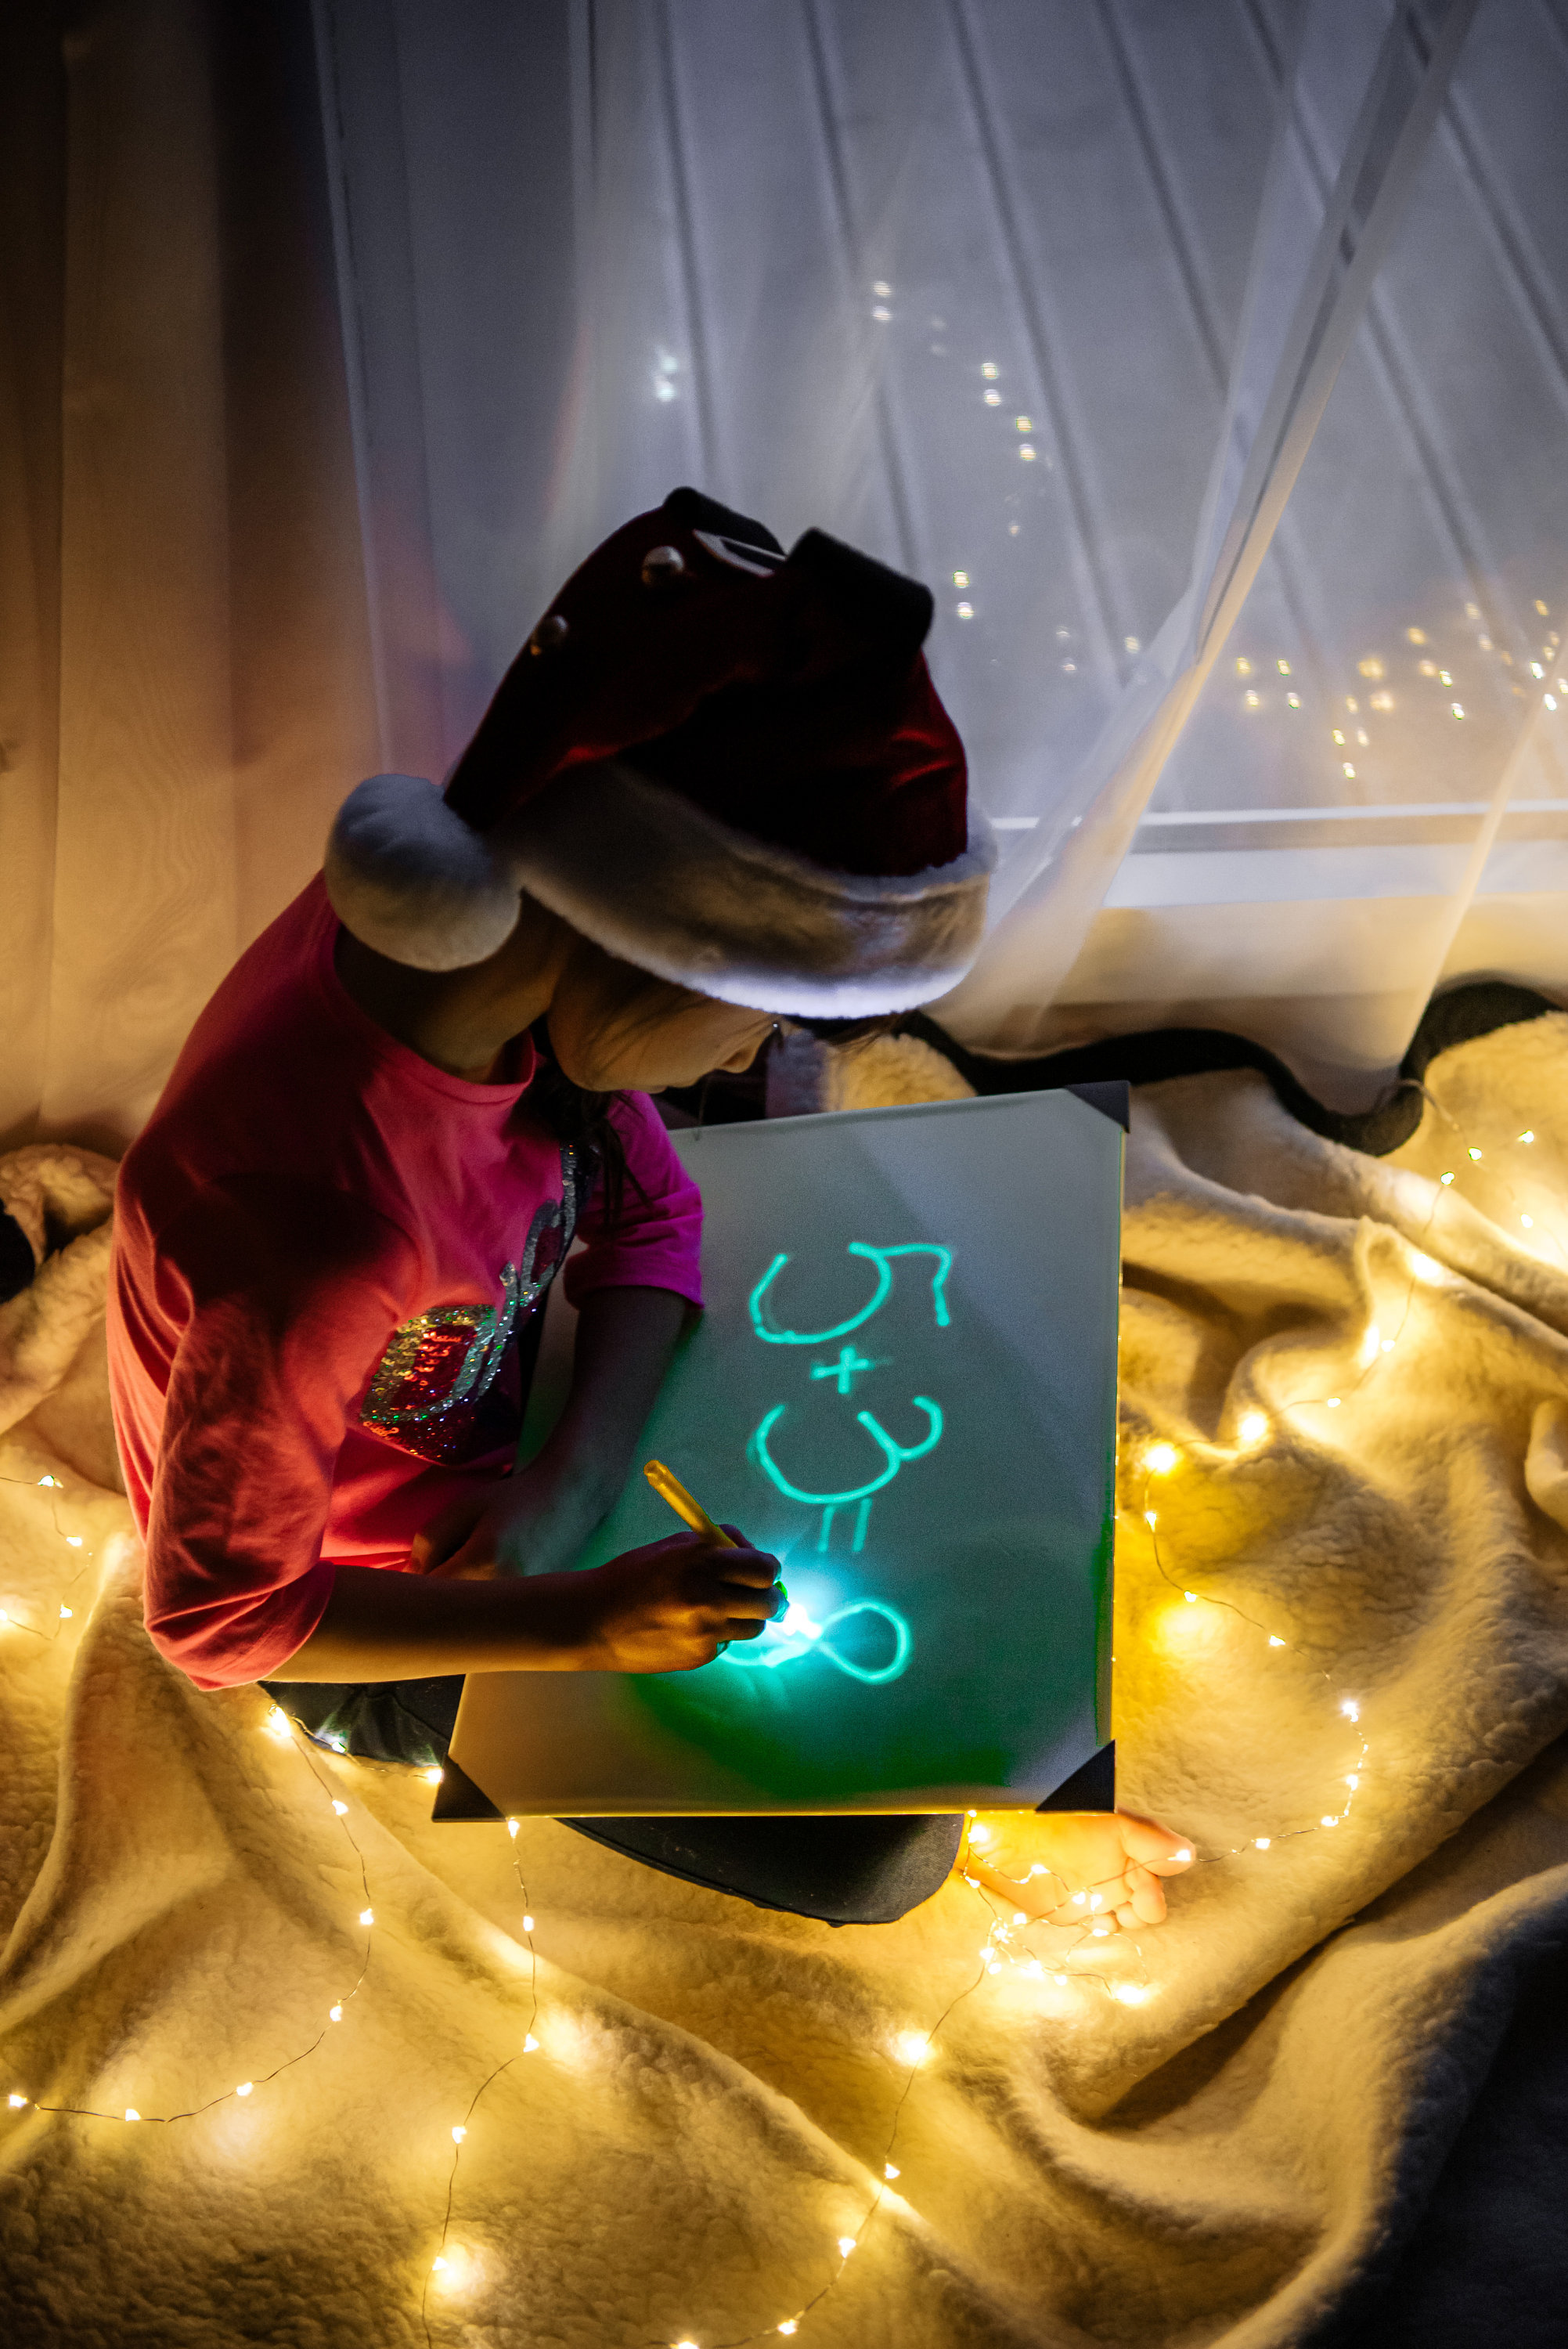 JIEHED Light up Drawing Fun Developing Toy Draw Sketchpad Board Portable Fun and Developing Toy for Children Kids School Luminescent Drawing Board Glow in Dark Kids Paint Toy 